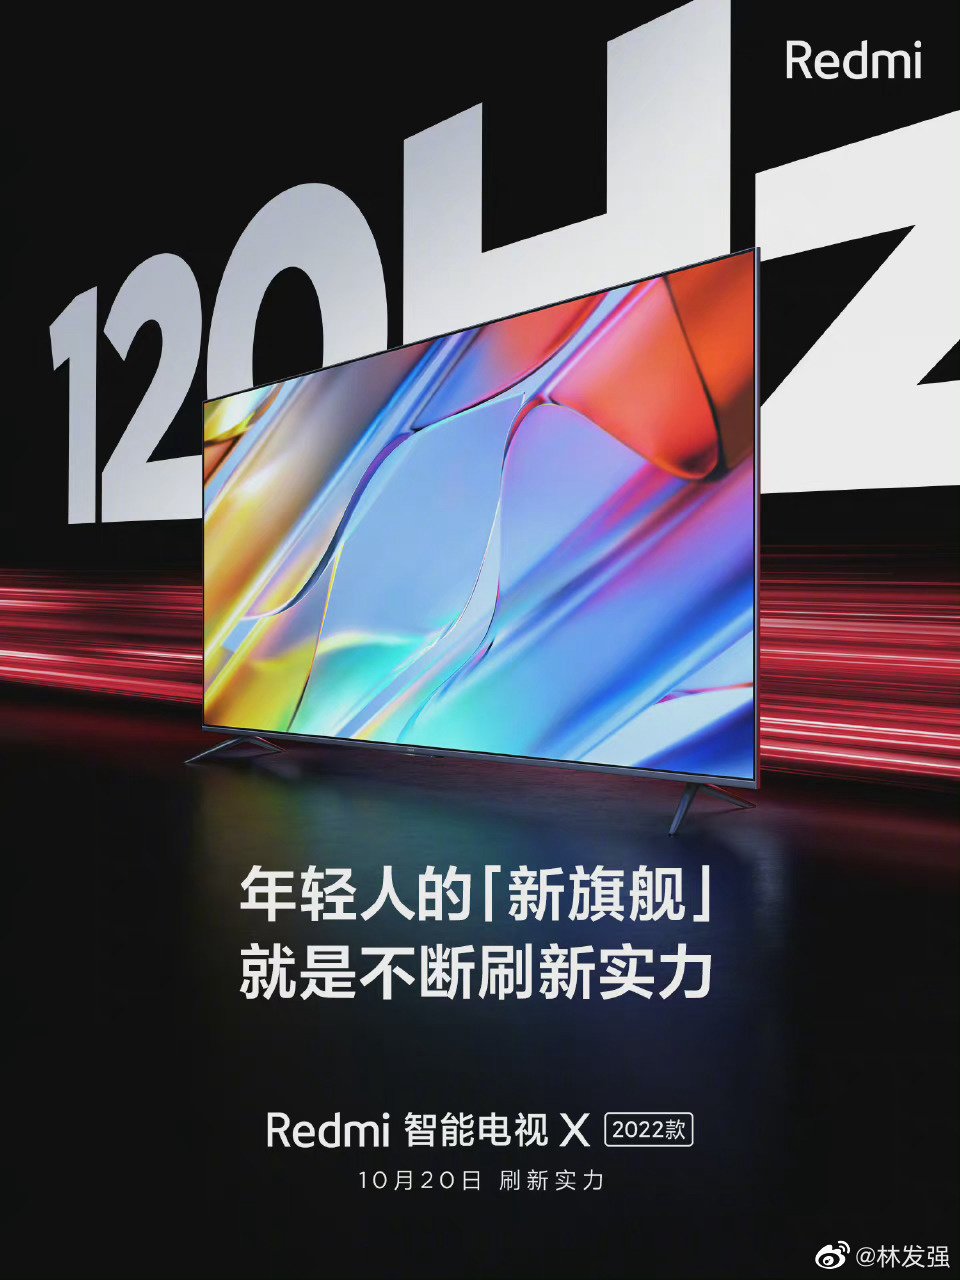 Redmi unveils Smart TV X 2022 with 120Hz refresh rate & Dolby Vision  support - Smartprix